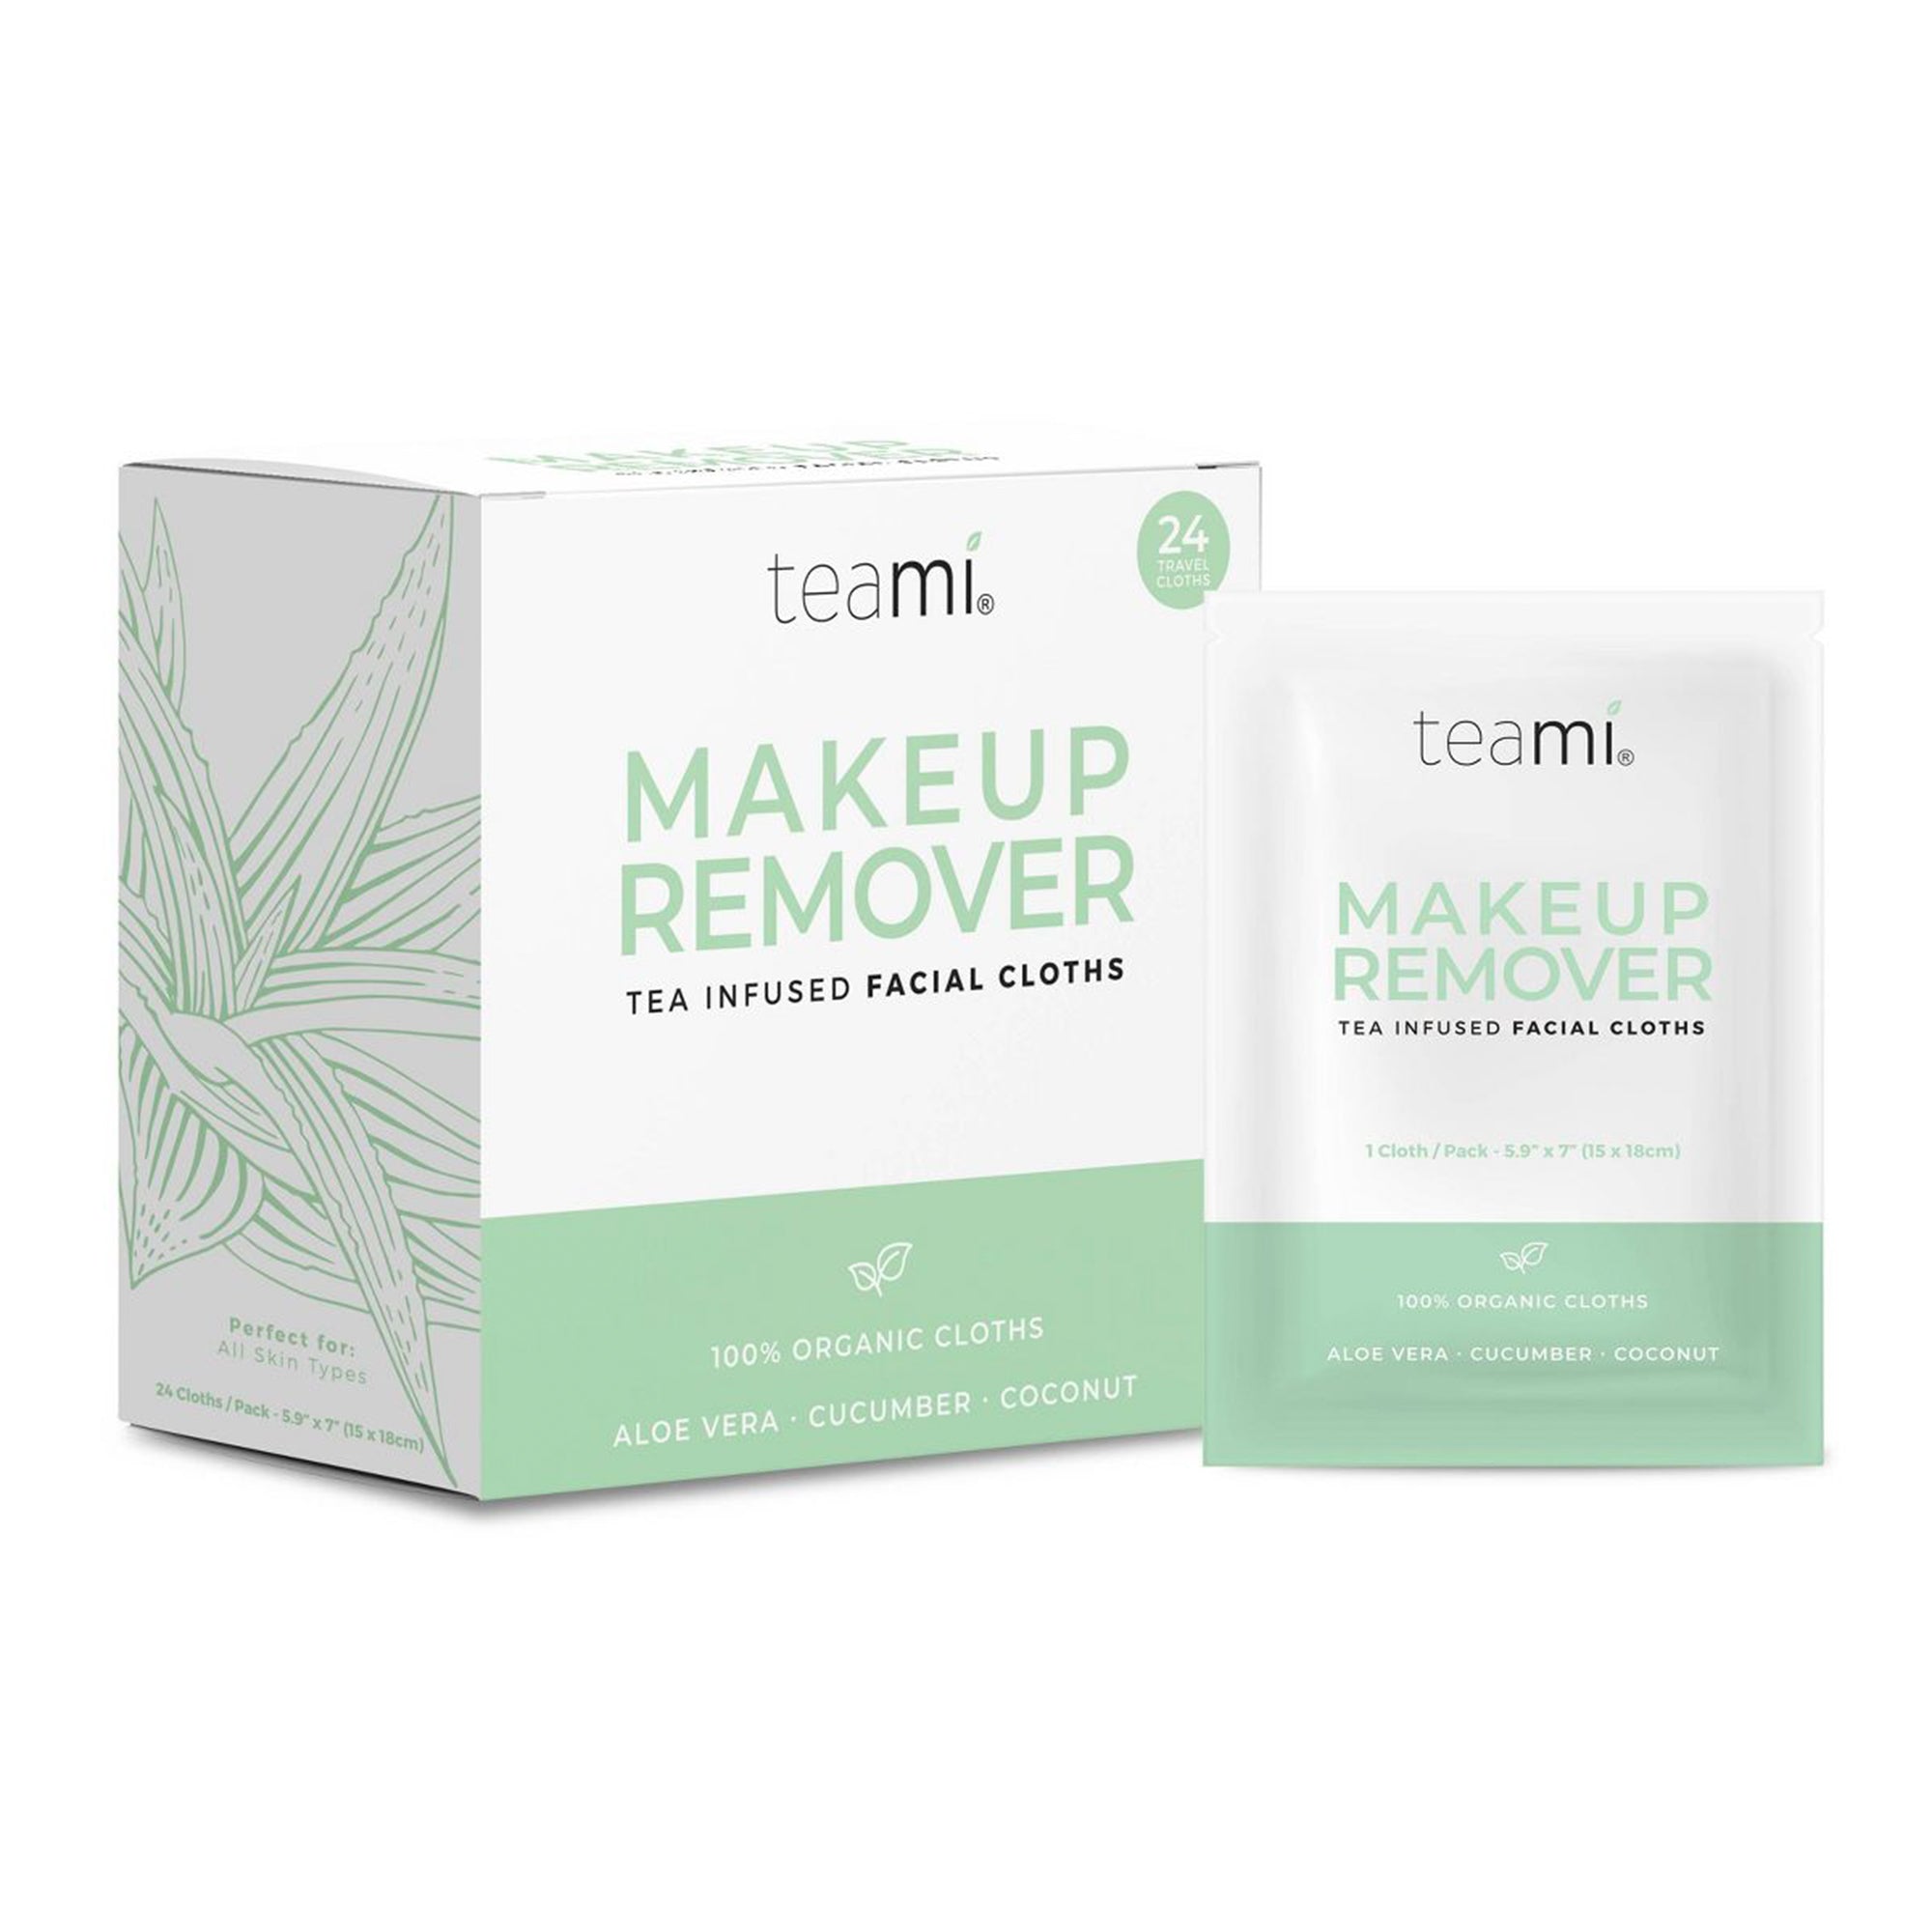 Teami Makeup Remover Wipes, 24ct